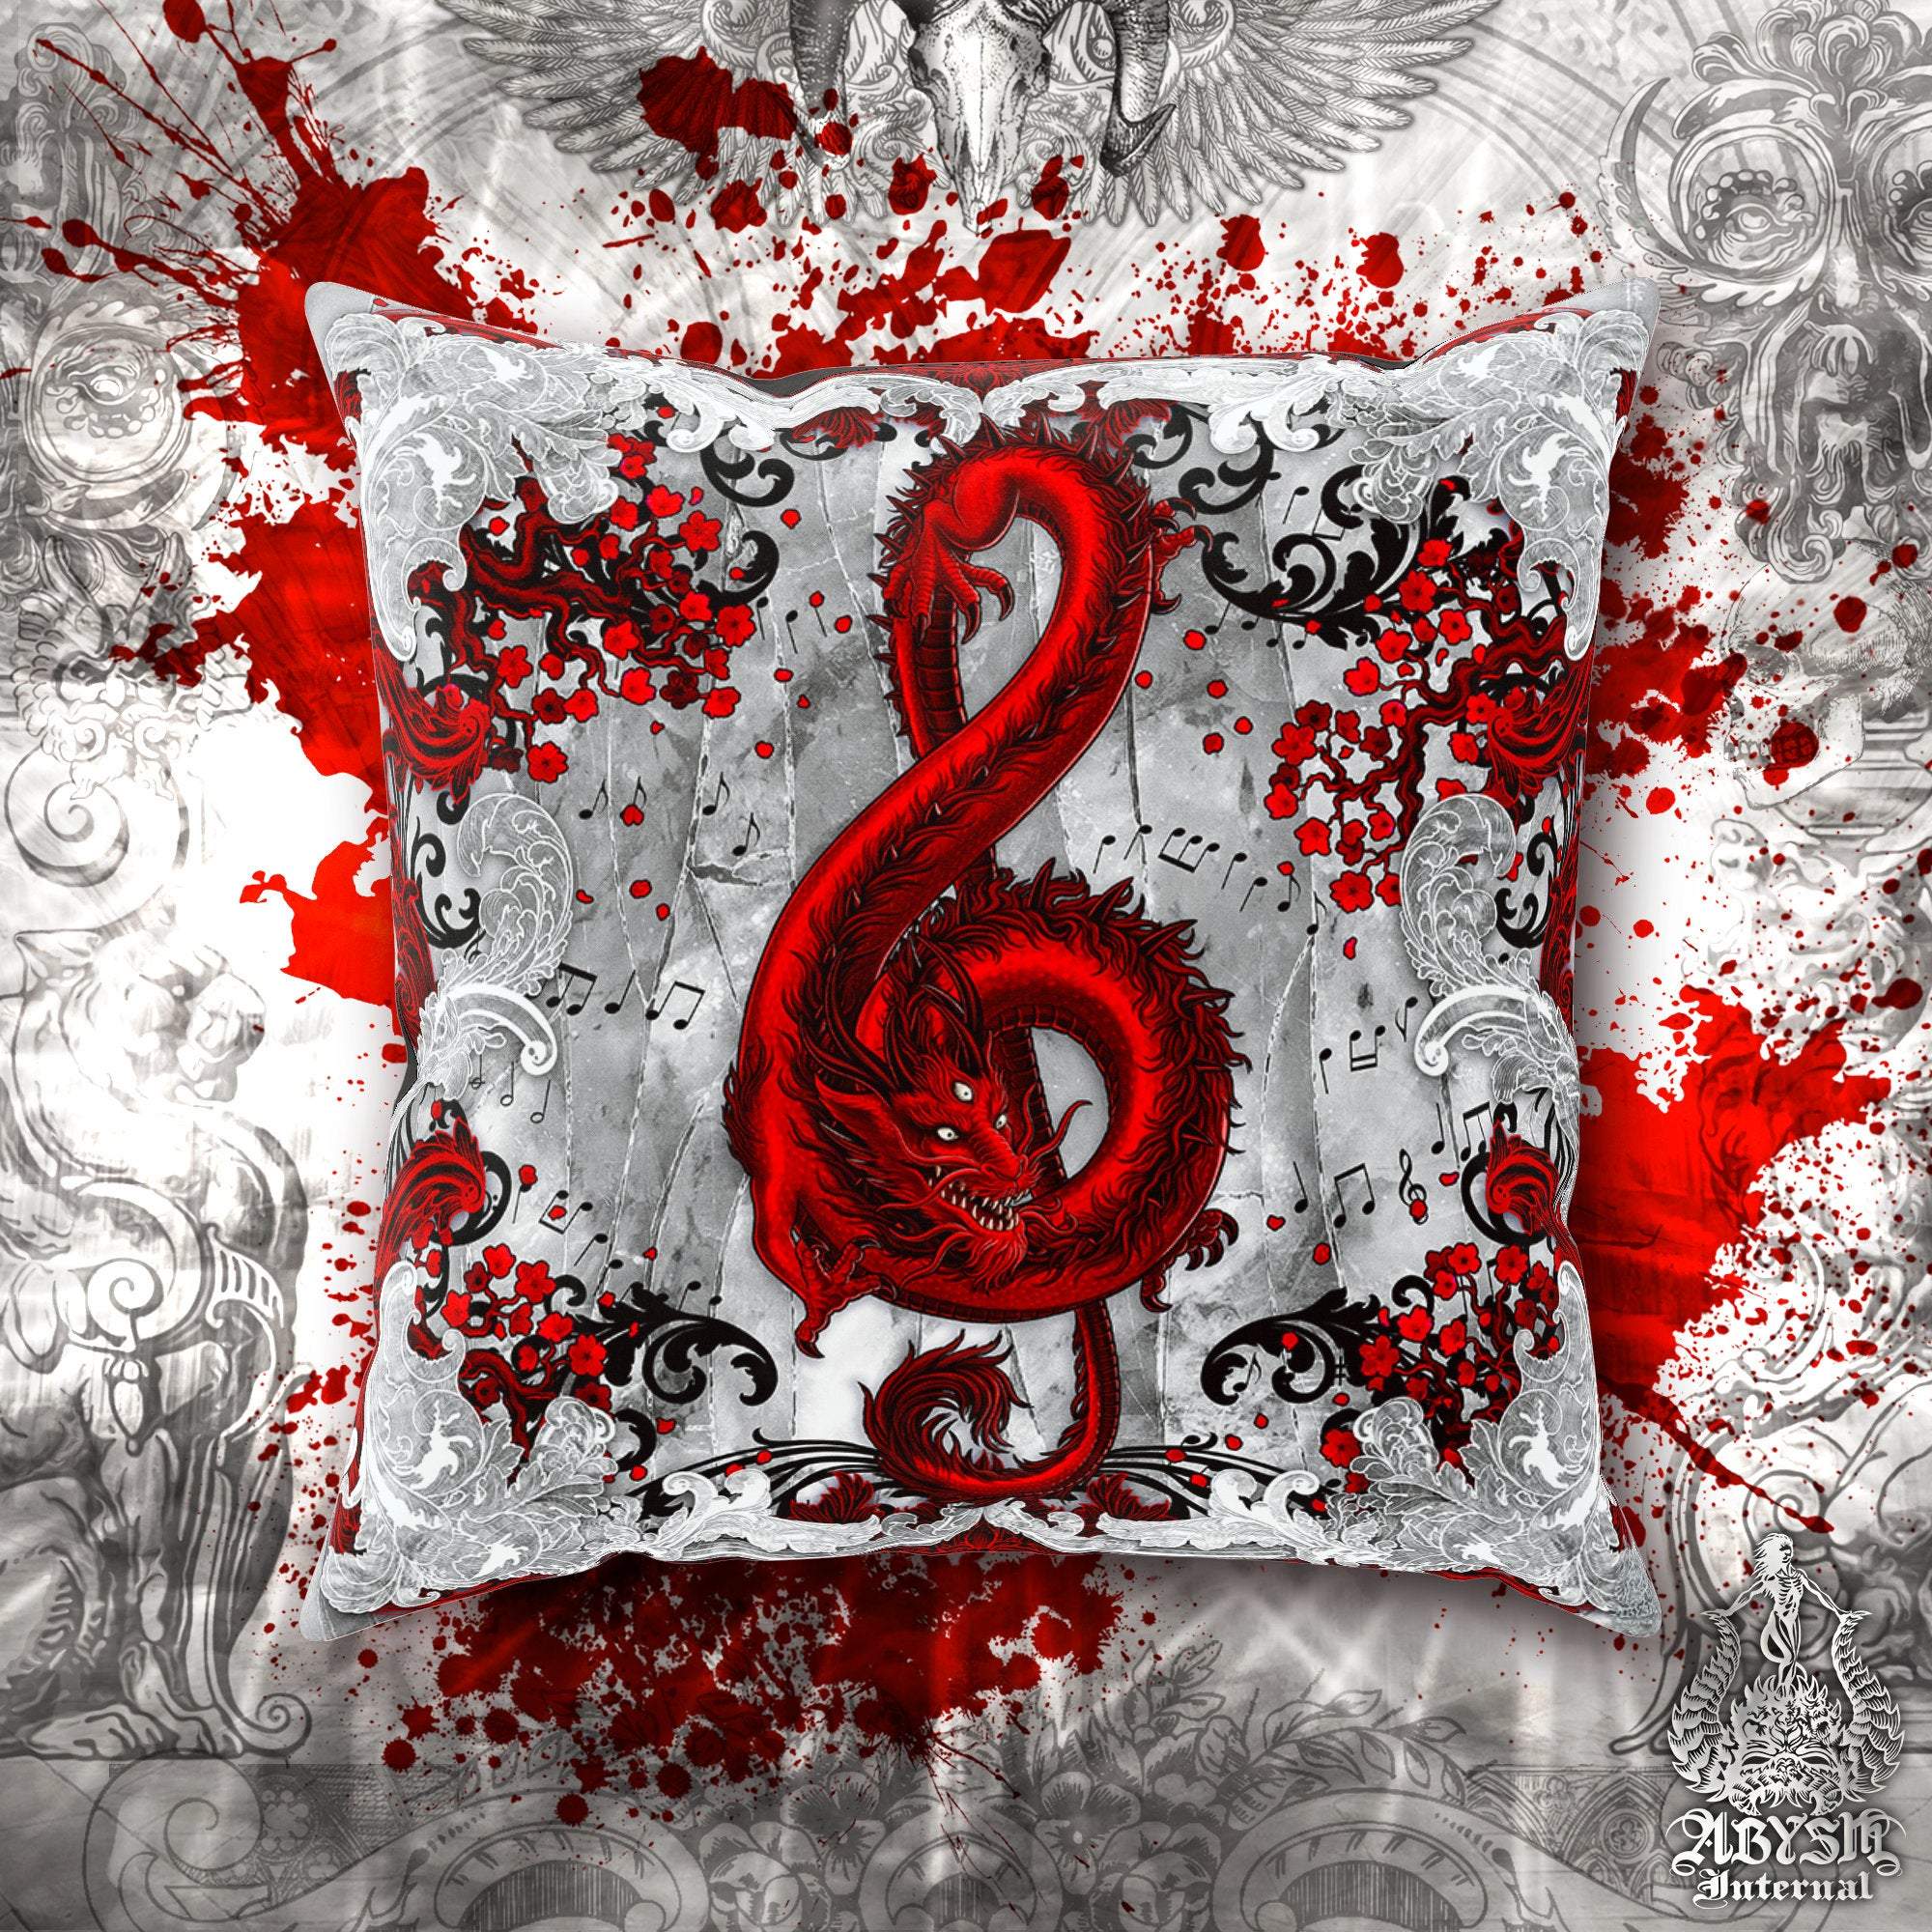 Red Dragon Throw Pillow, Decorative Accent Cushion, Gothic Room Decor, Music Art, Alternative Home - Treble Clef, Bloody White Goth - Abysm Internal